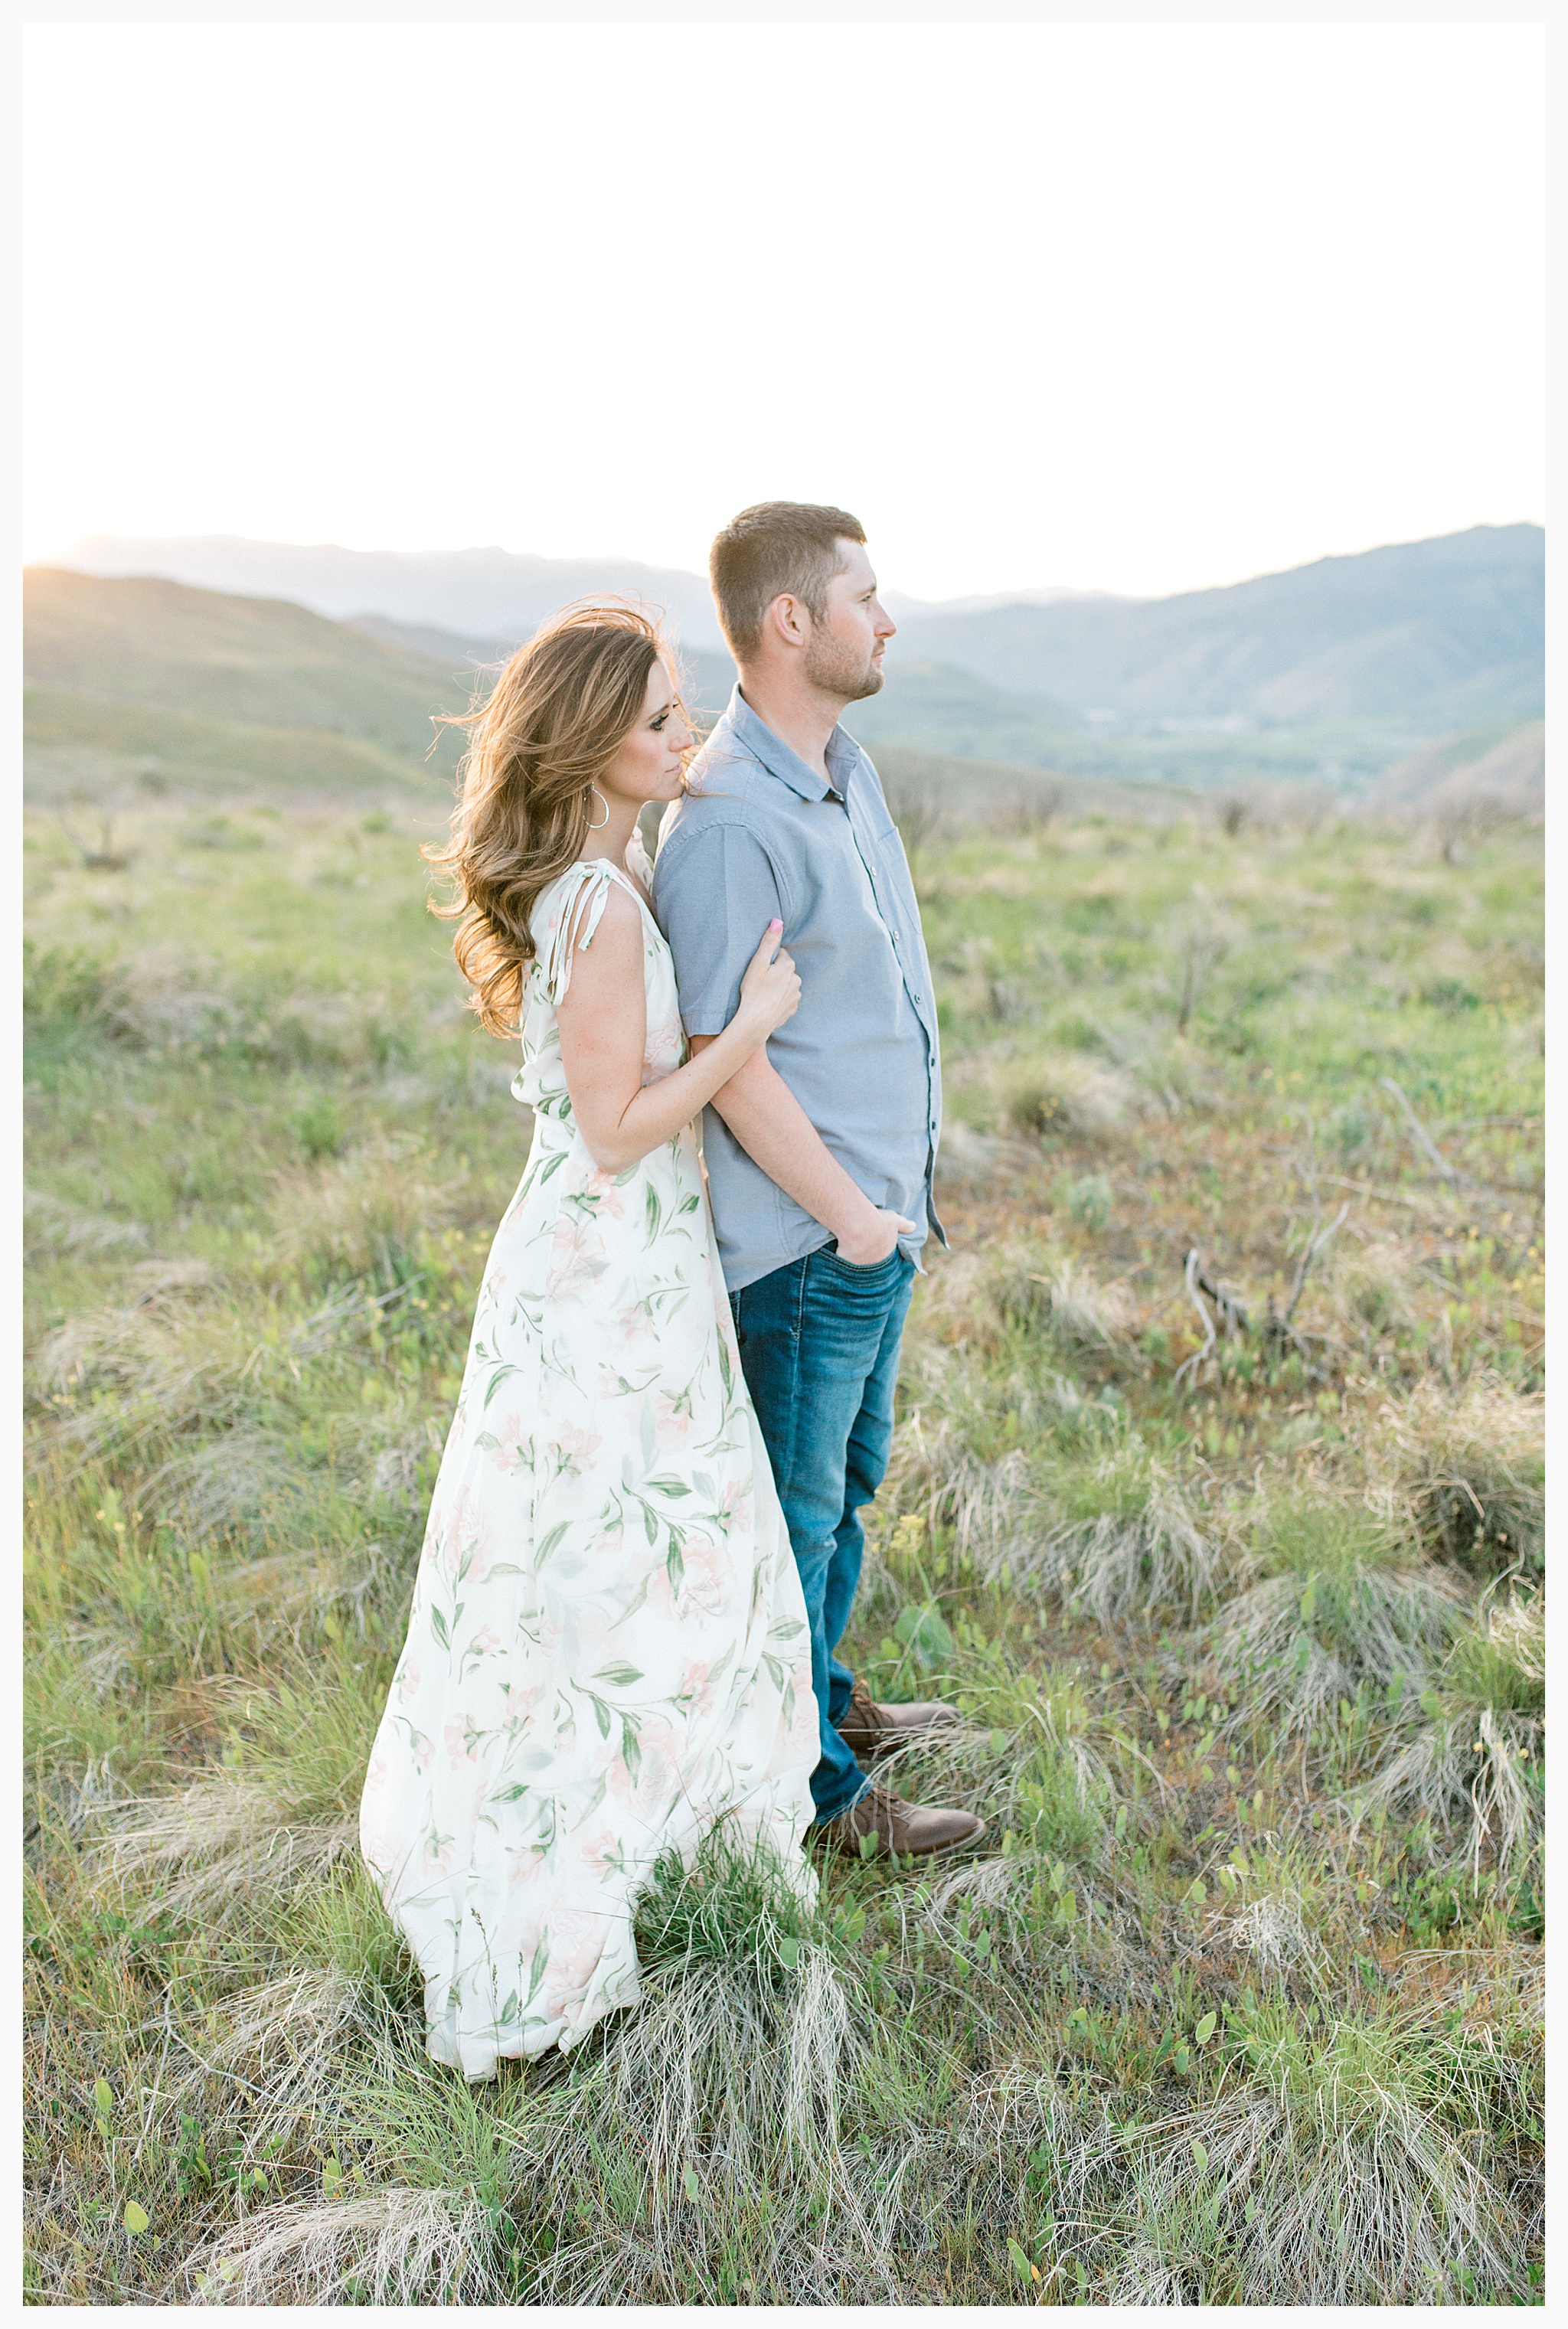 Engagement session amongst the wildflowers in Wenatchee, Washington | Engagement Session Outfit Inspiration for Wedding Photography with Emma Rose Company | Light and Airy PNW Photographer, Seattle Bride_0033.jpg